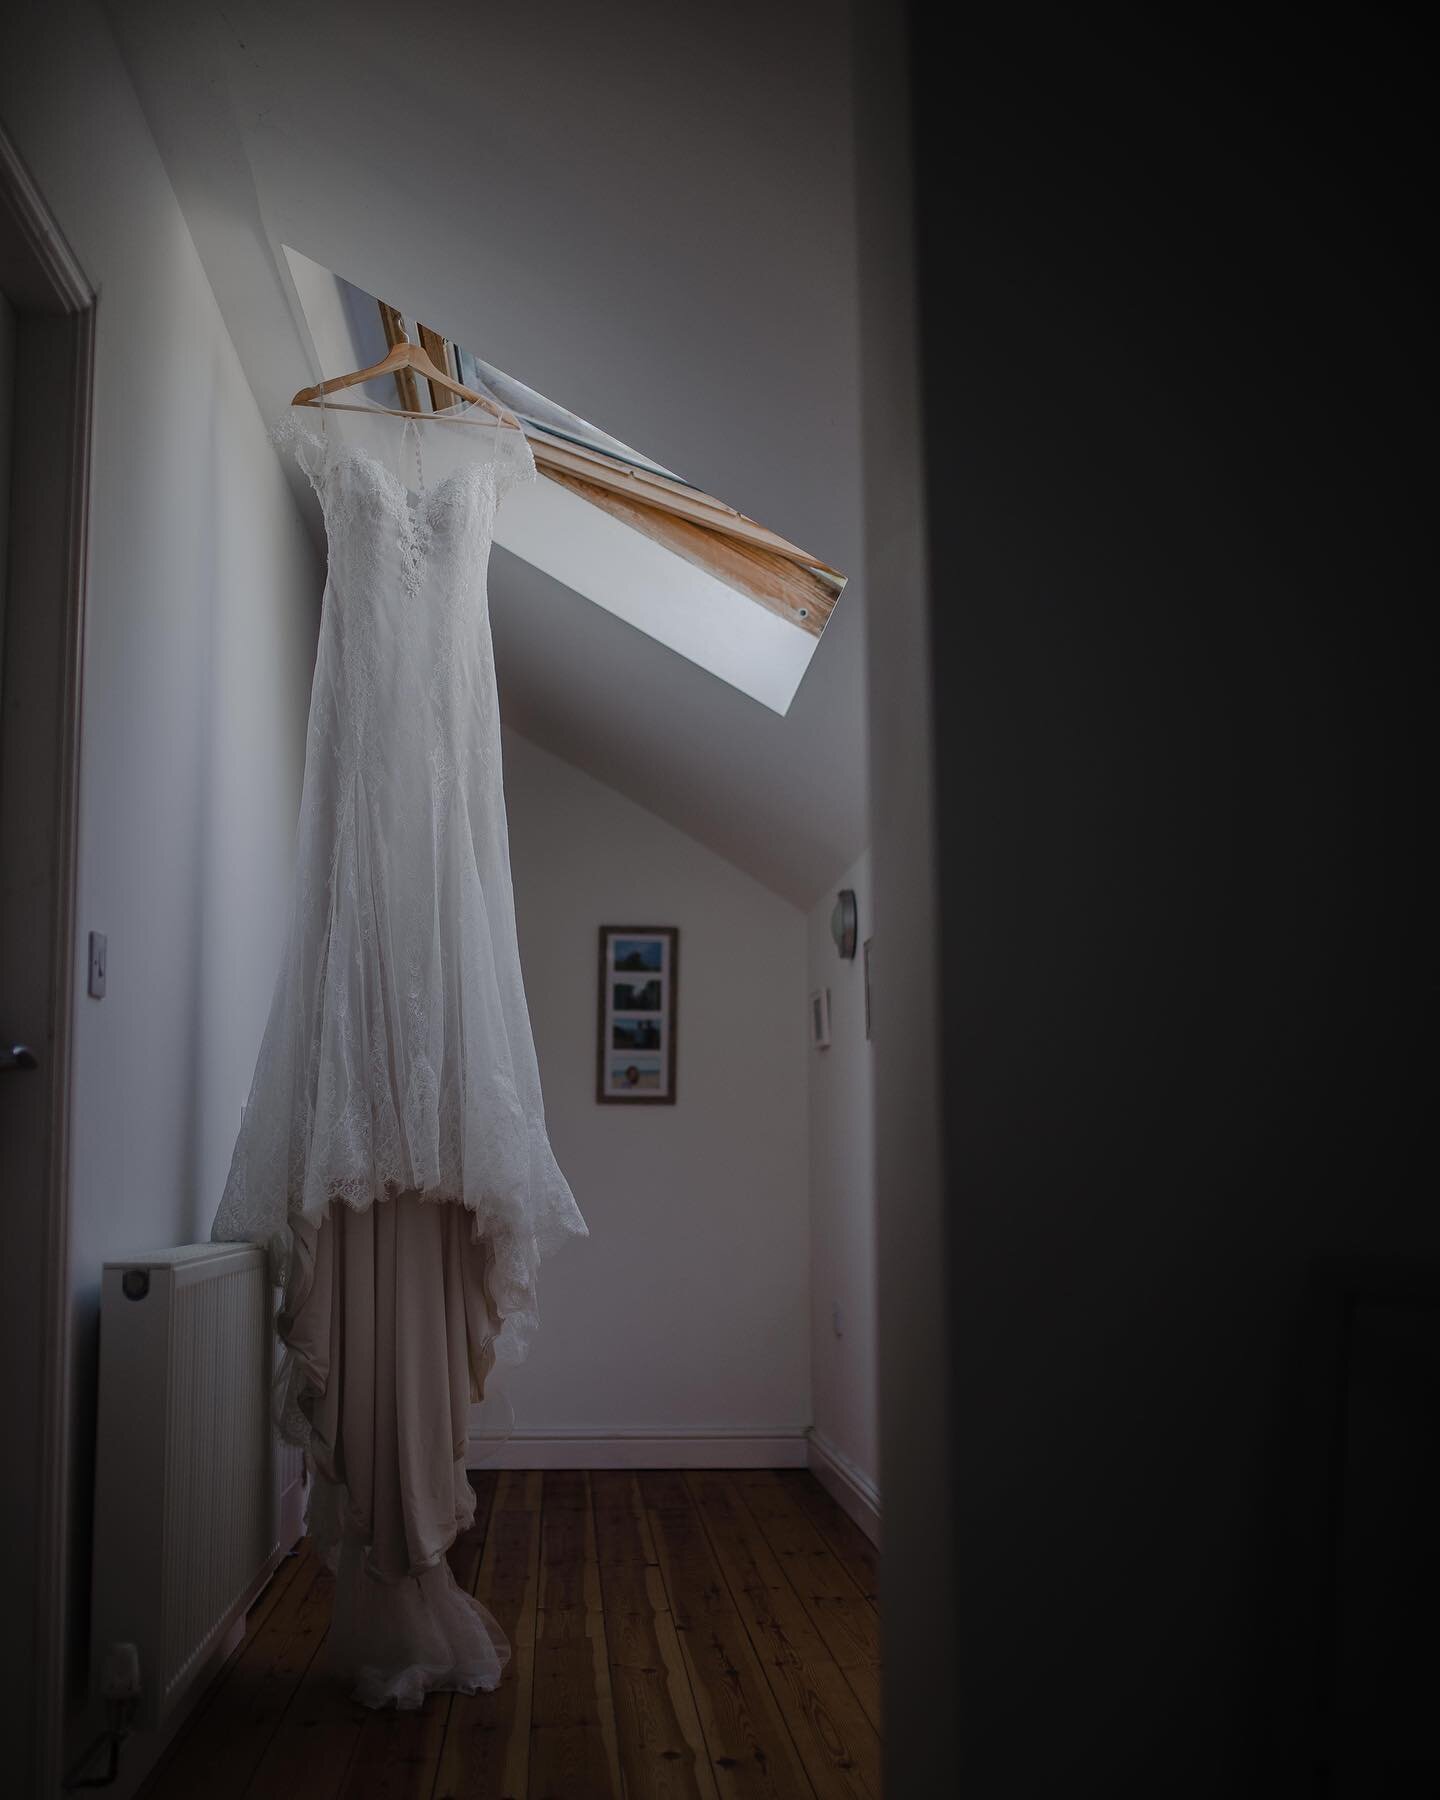 Skylights ALWAYS make for gorgeous indoor lighting. We loved the getting ready shots for this beautiful Anglesey wedding.

The bride&rsquo;s stunning veil by @wildernessbride is still one of our all time favorites.

#rusticwedding #peakdistrictweddin